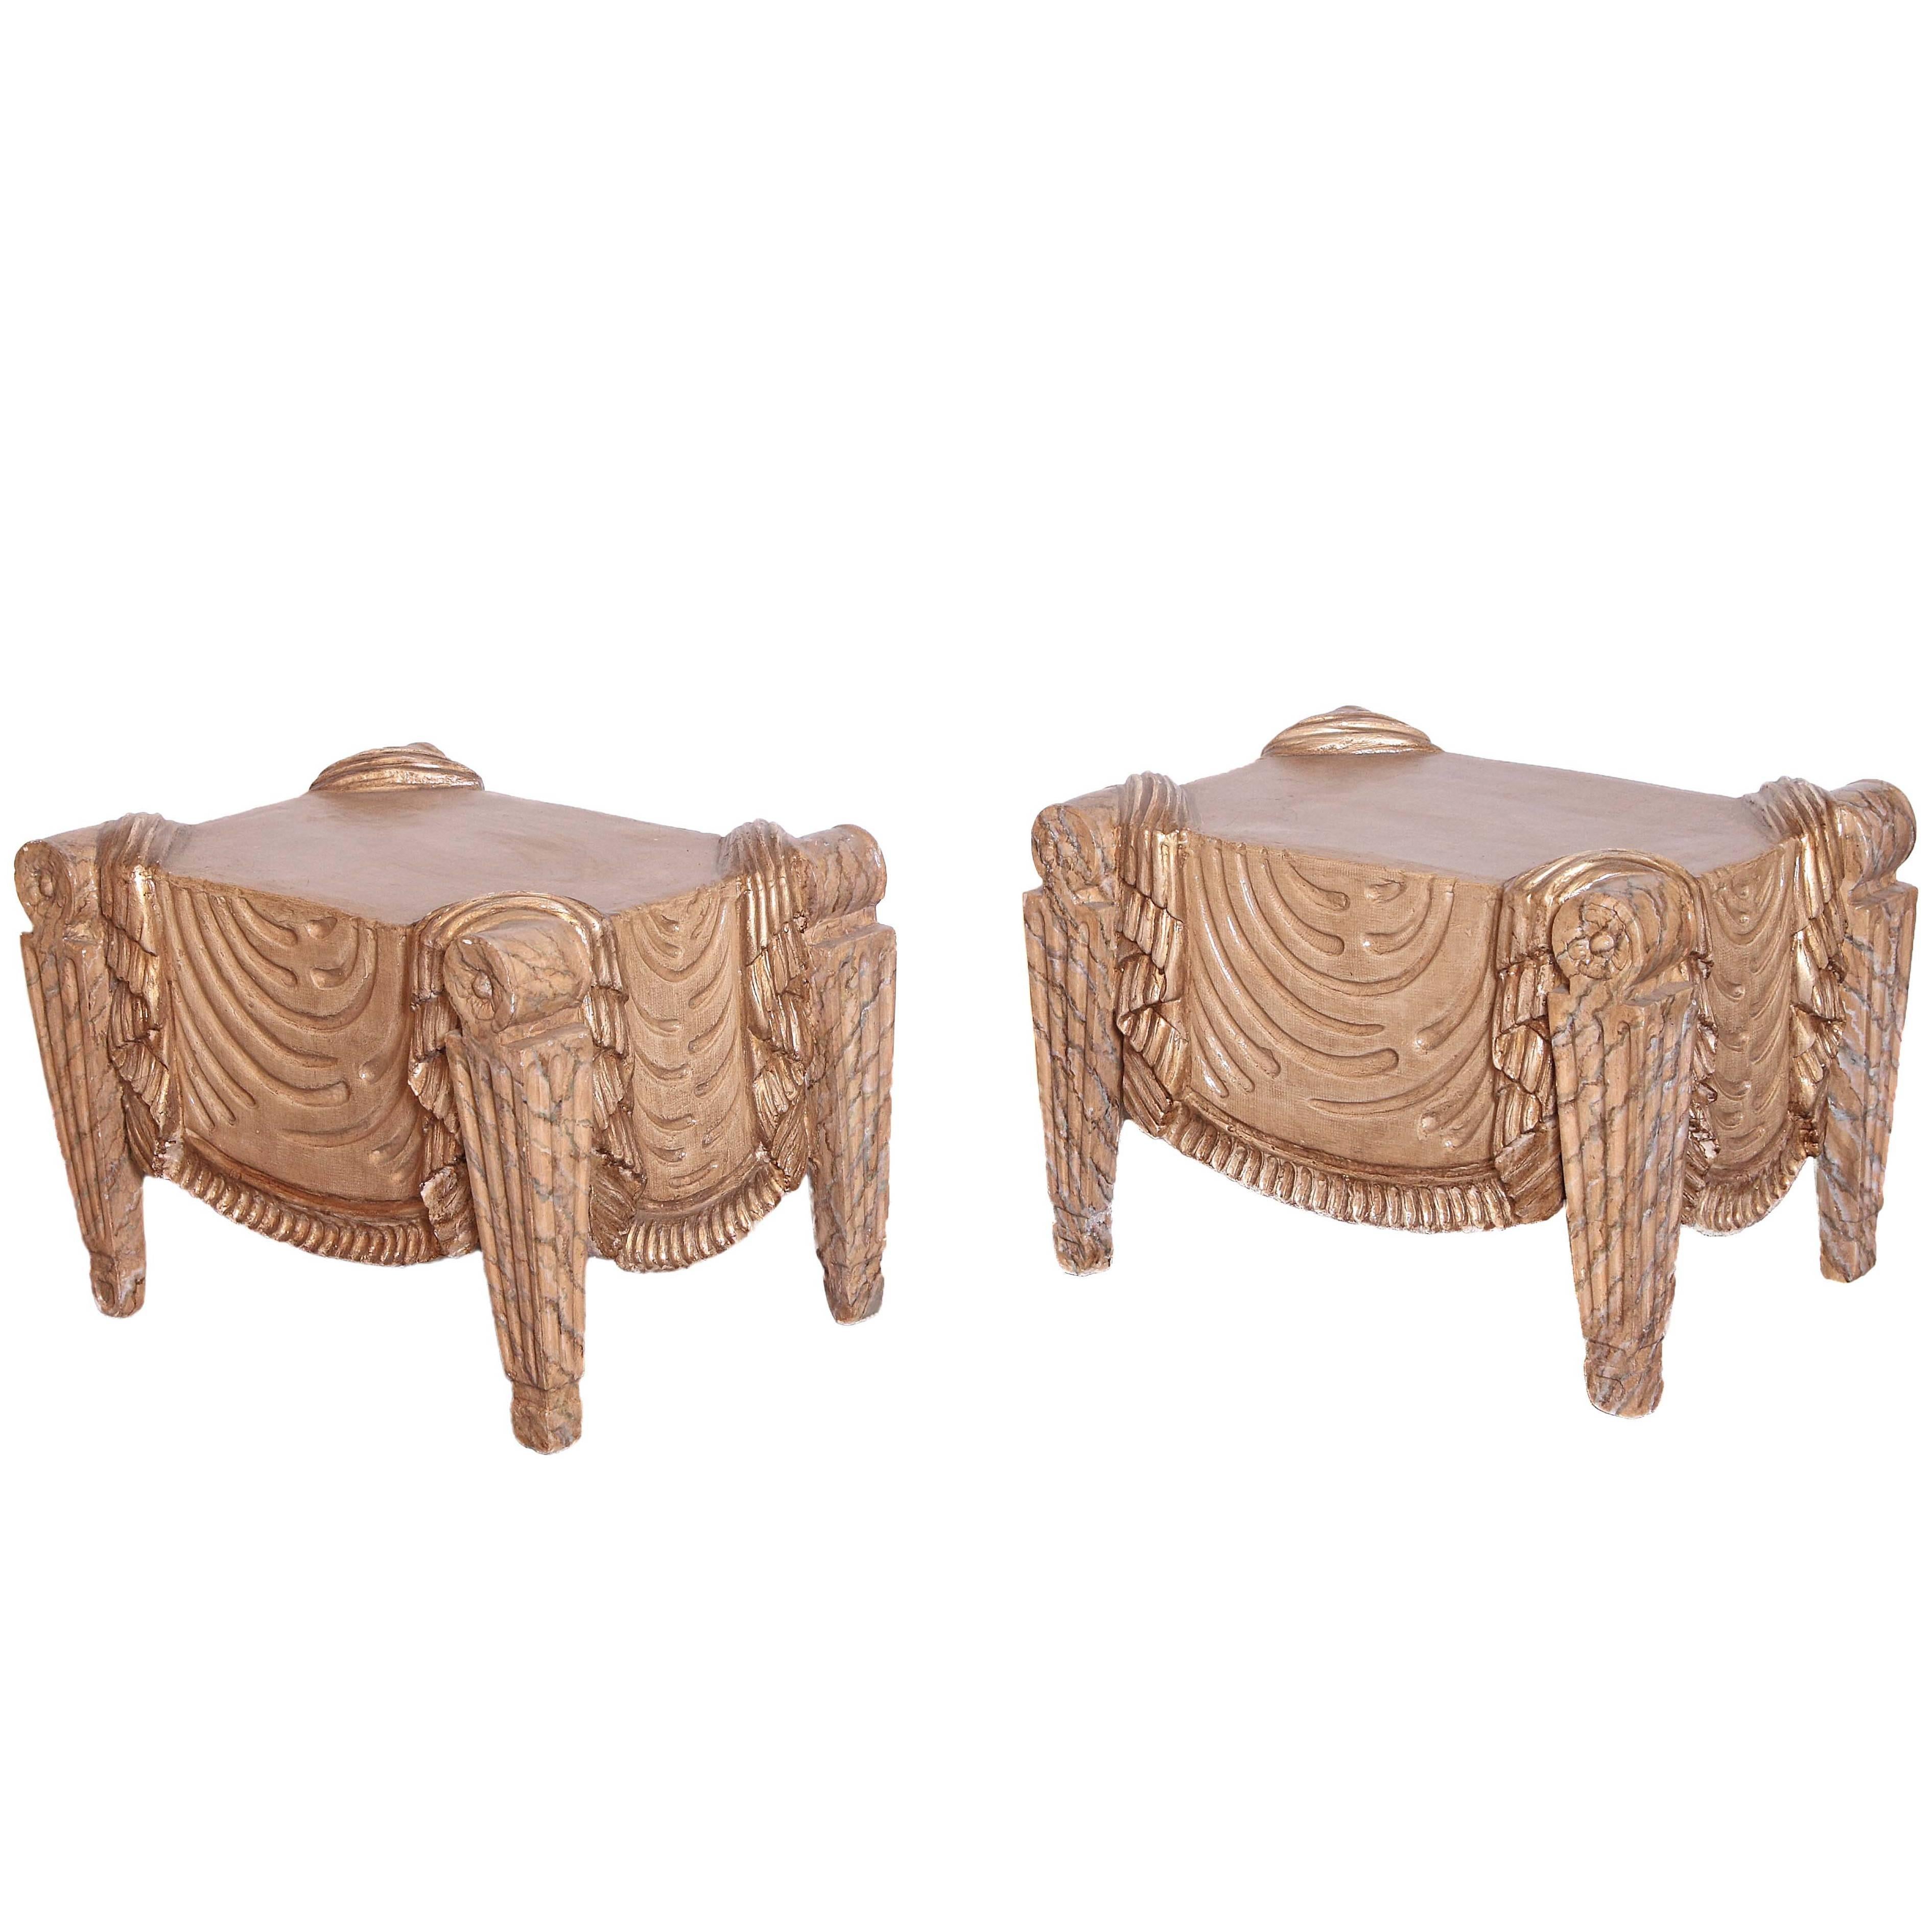 Pair of Carved Beech Wood Stools